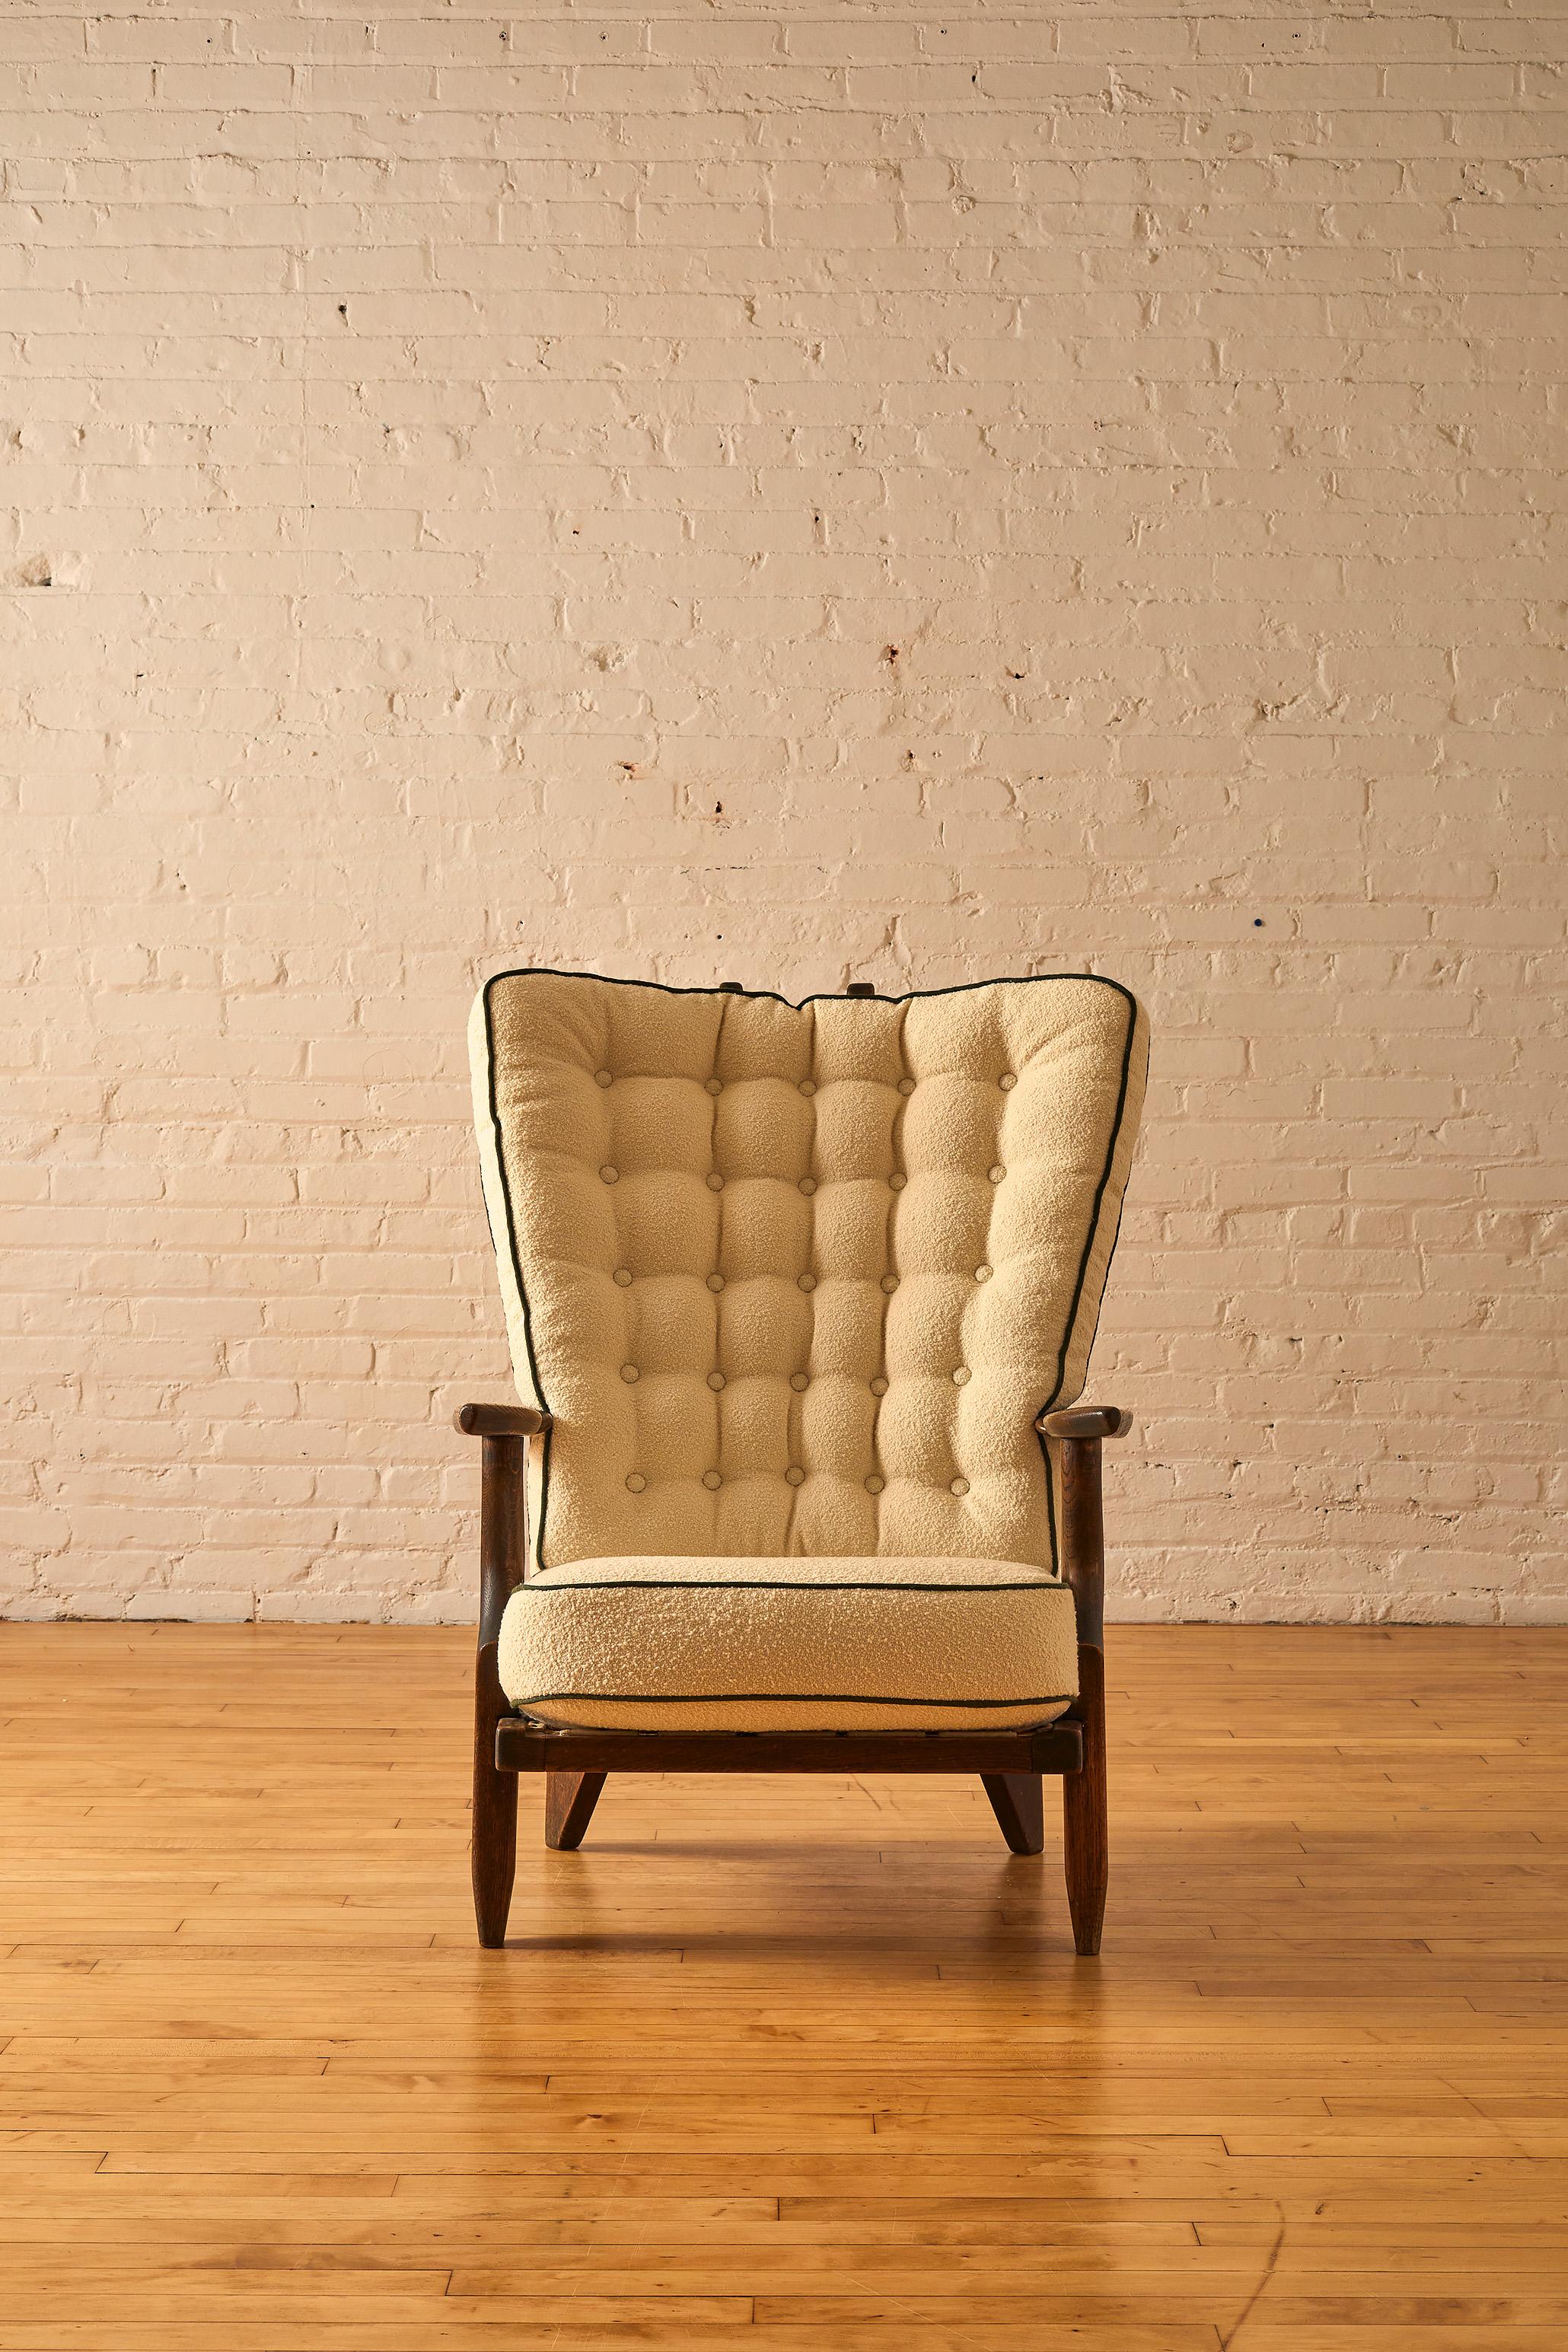 Guillerme et Chambron grand repos armchair with oak frame. 

About Guillerme et Chambron:

Robert Guillerme, based in Lille, Northern France, graduated from École Boulle in 1934 where he excelled in furniture design and architecture. Jacques